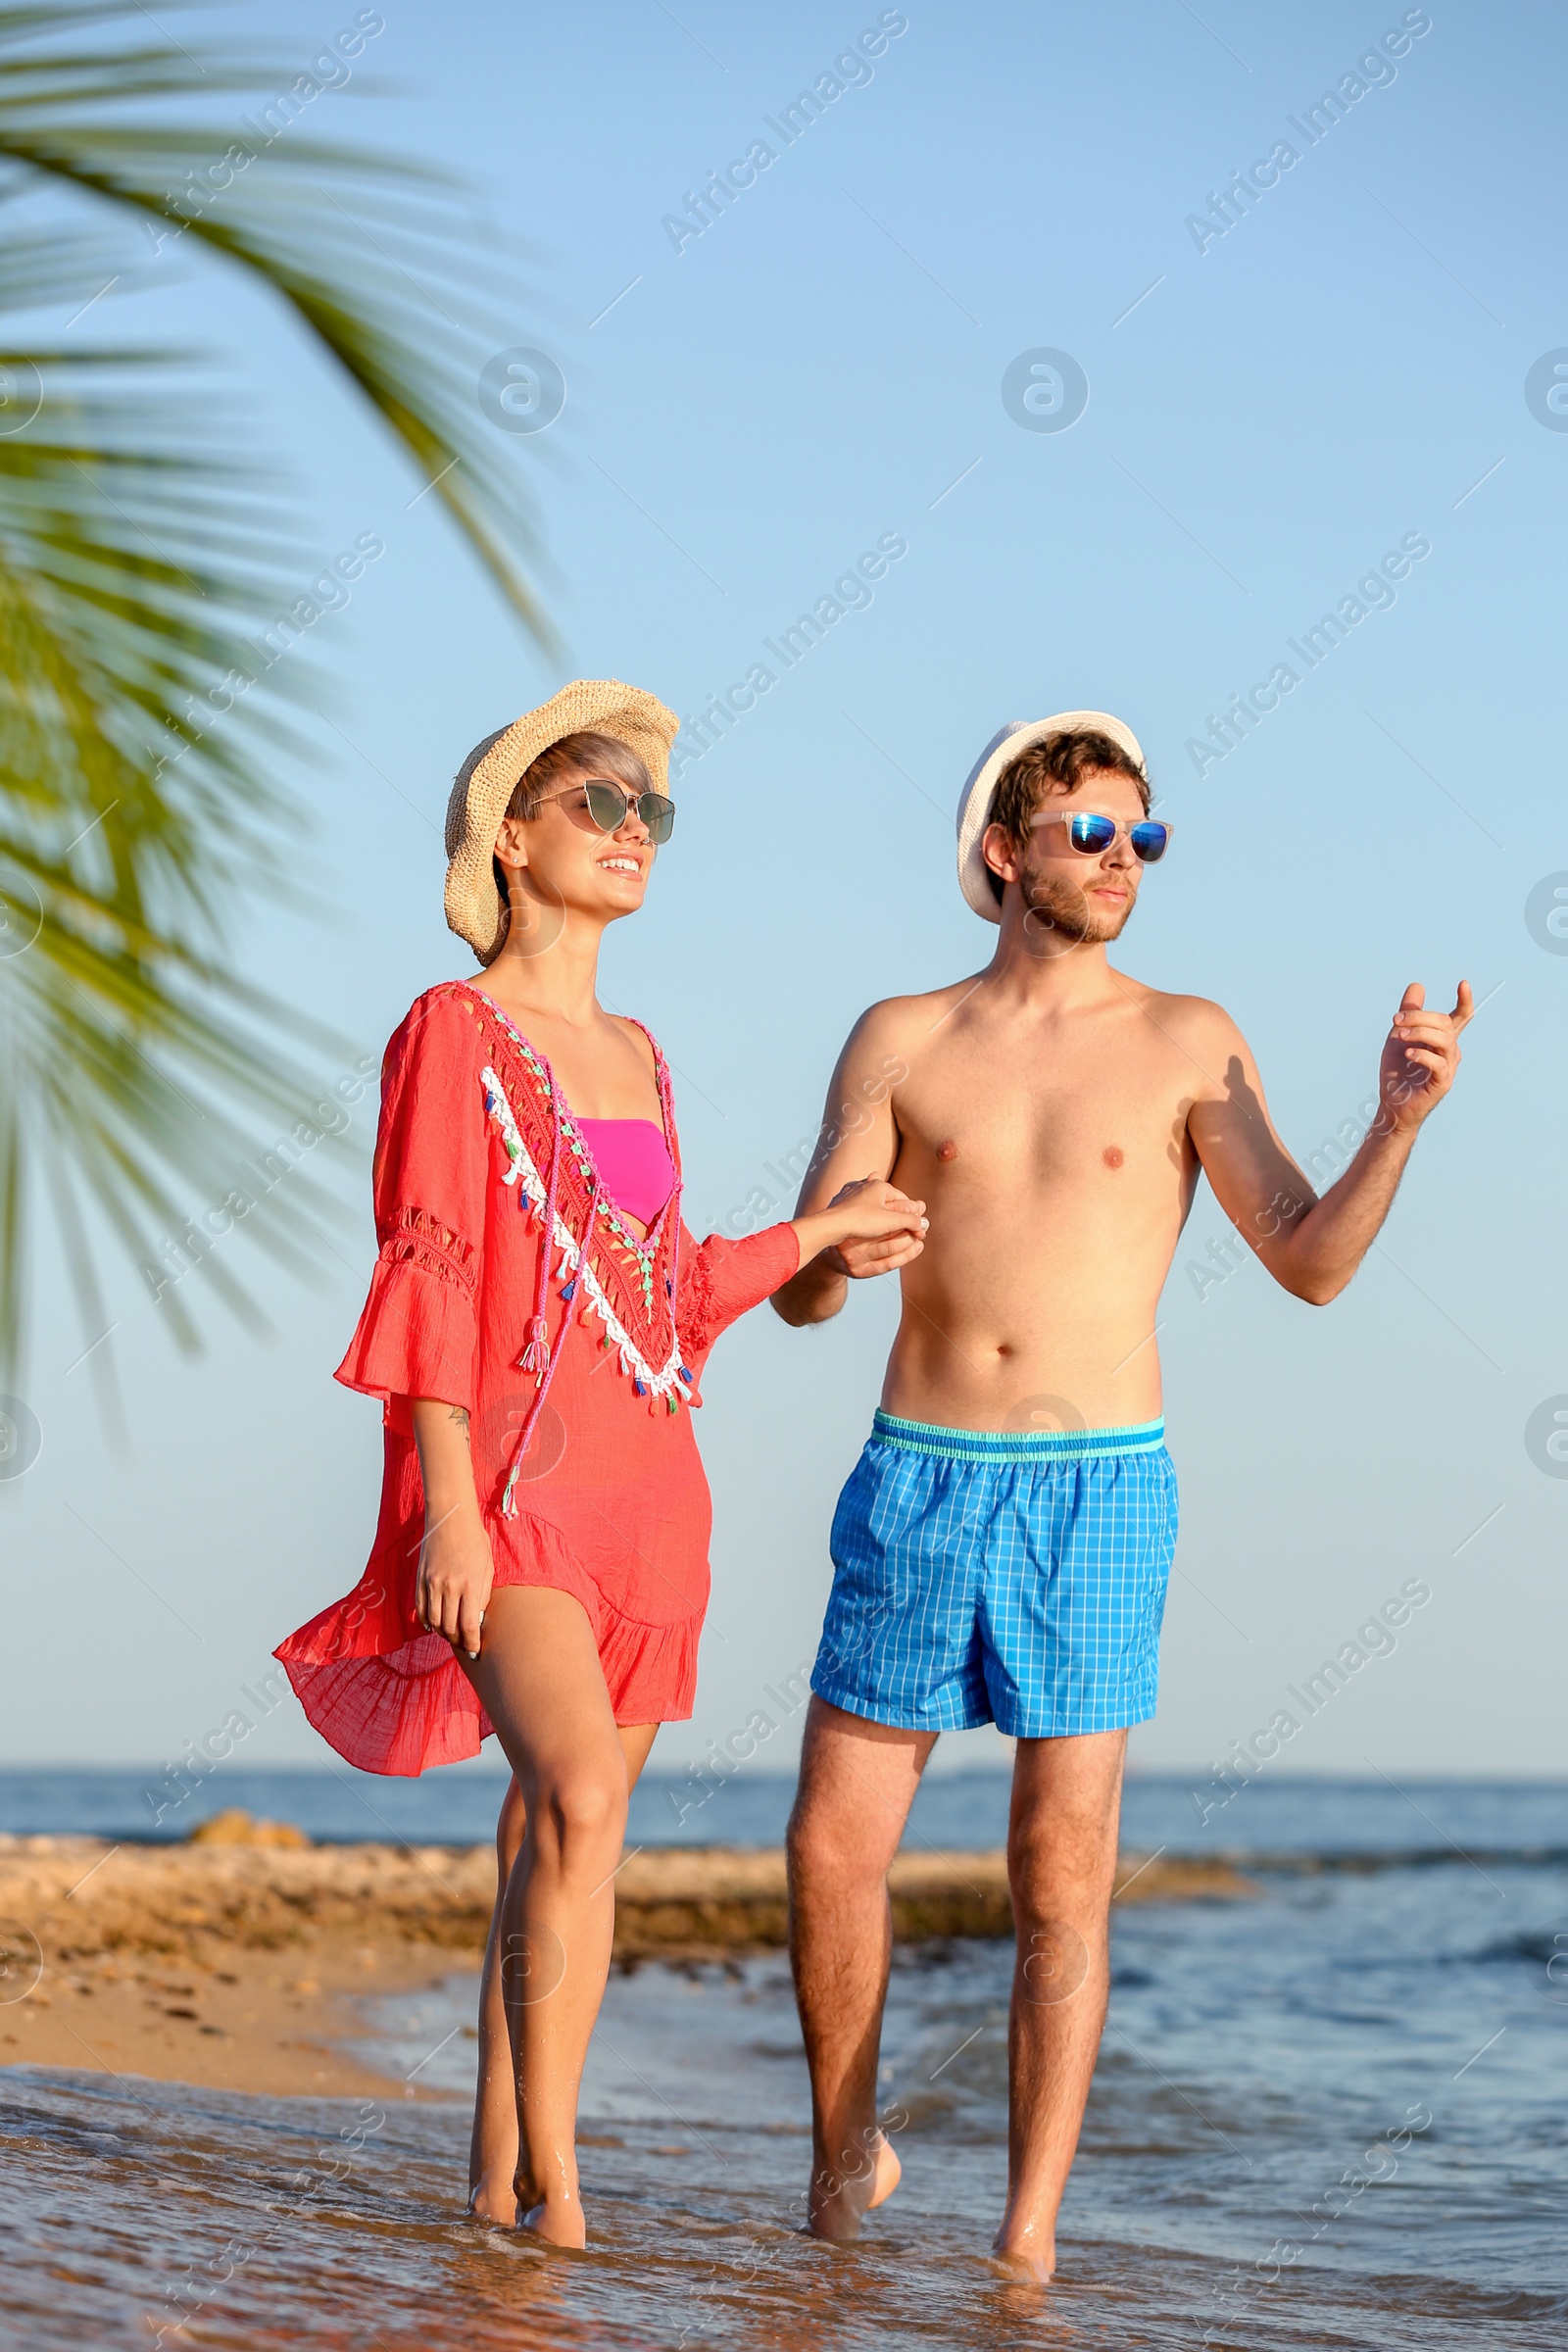 Photo of Happy young couple walking together on beach